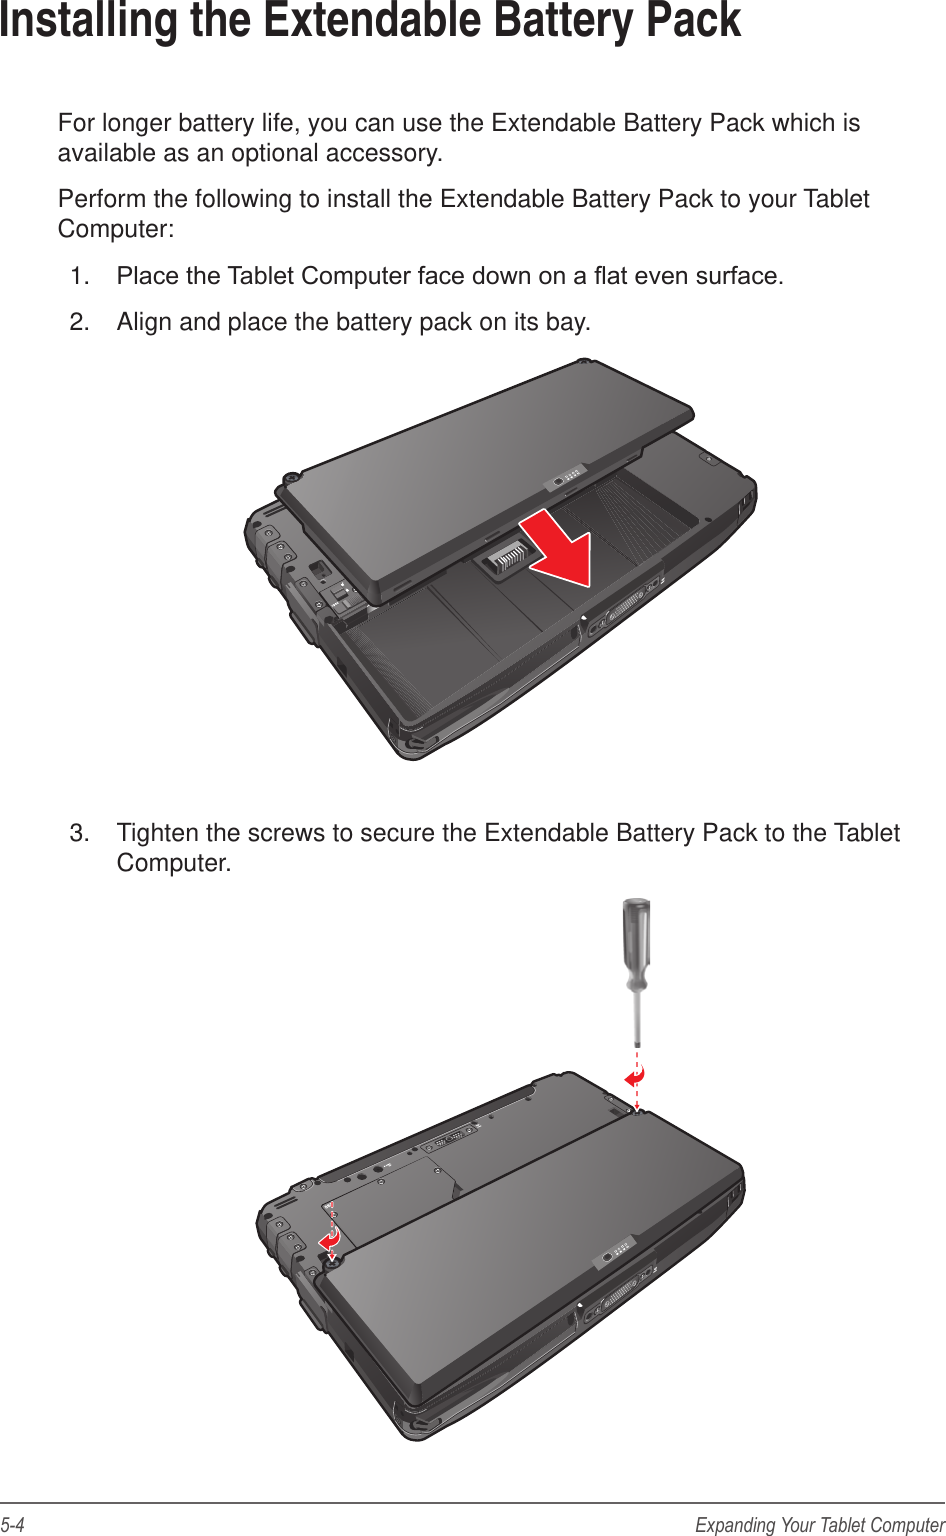 5-4 Expanding Your Tablet ComputerInstalling the Extendable Battery PackFor longer battery life, you can use the Extendable Battery Pack which is available as an optional accessory.Perform the following to install the Extendable Battery Pack to your Tablet Computer:1.  Place the Tablet Computer face down on a at even surface.2.  Align and place the battery pack on its bay.3.  Tighten the screws to secure the Extendable Battery Pack to the Tablet Computer.